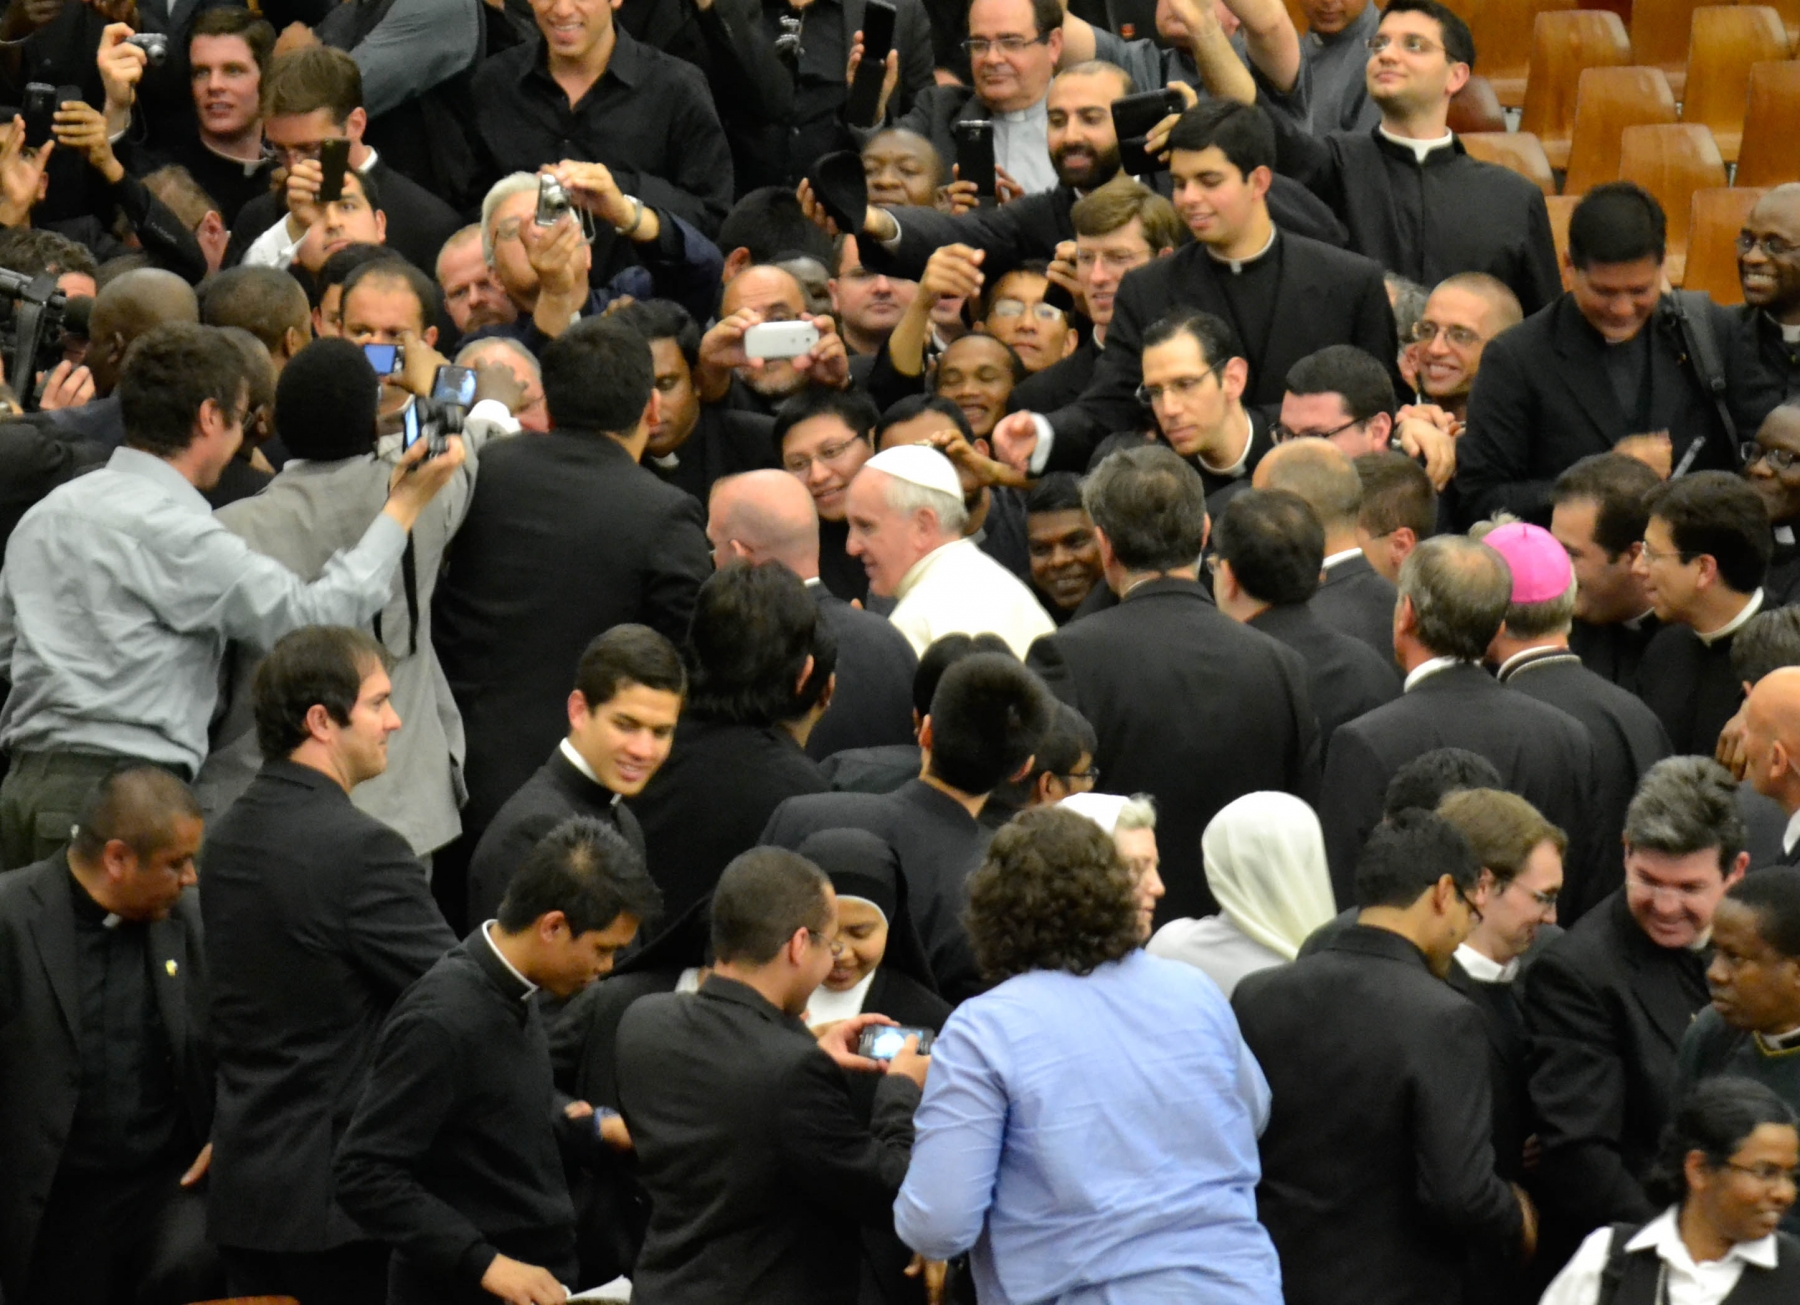 Pope Francis meets with seminarians from the Pontifical Roman universities at the Vatican.